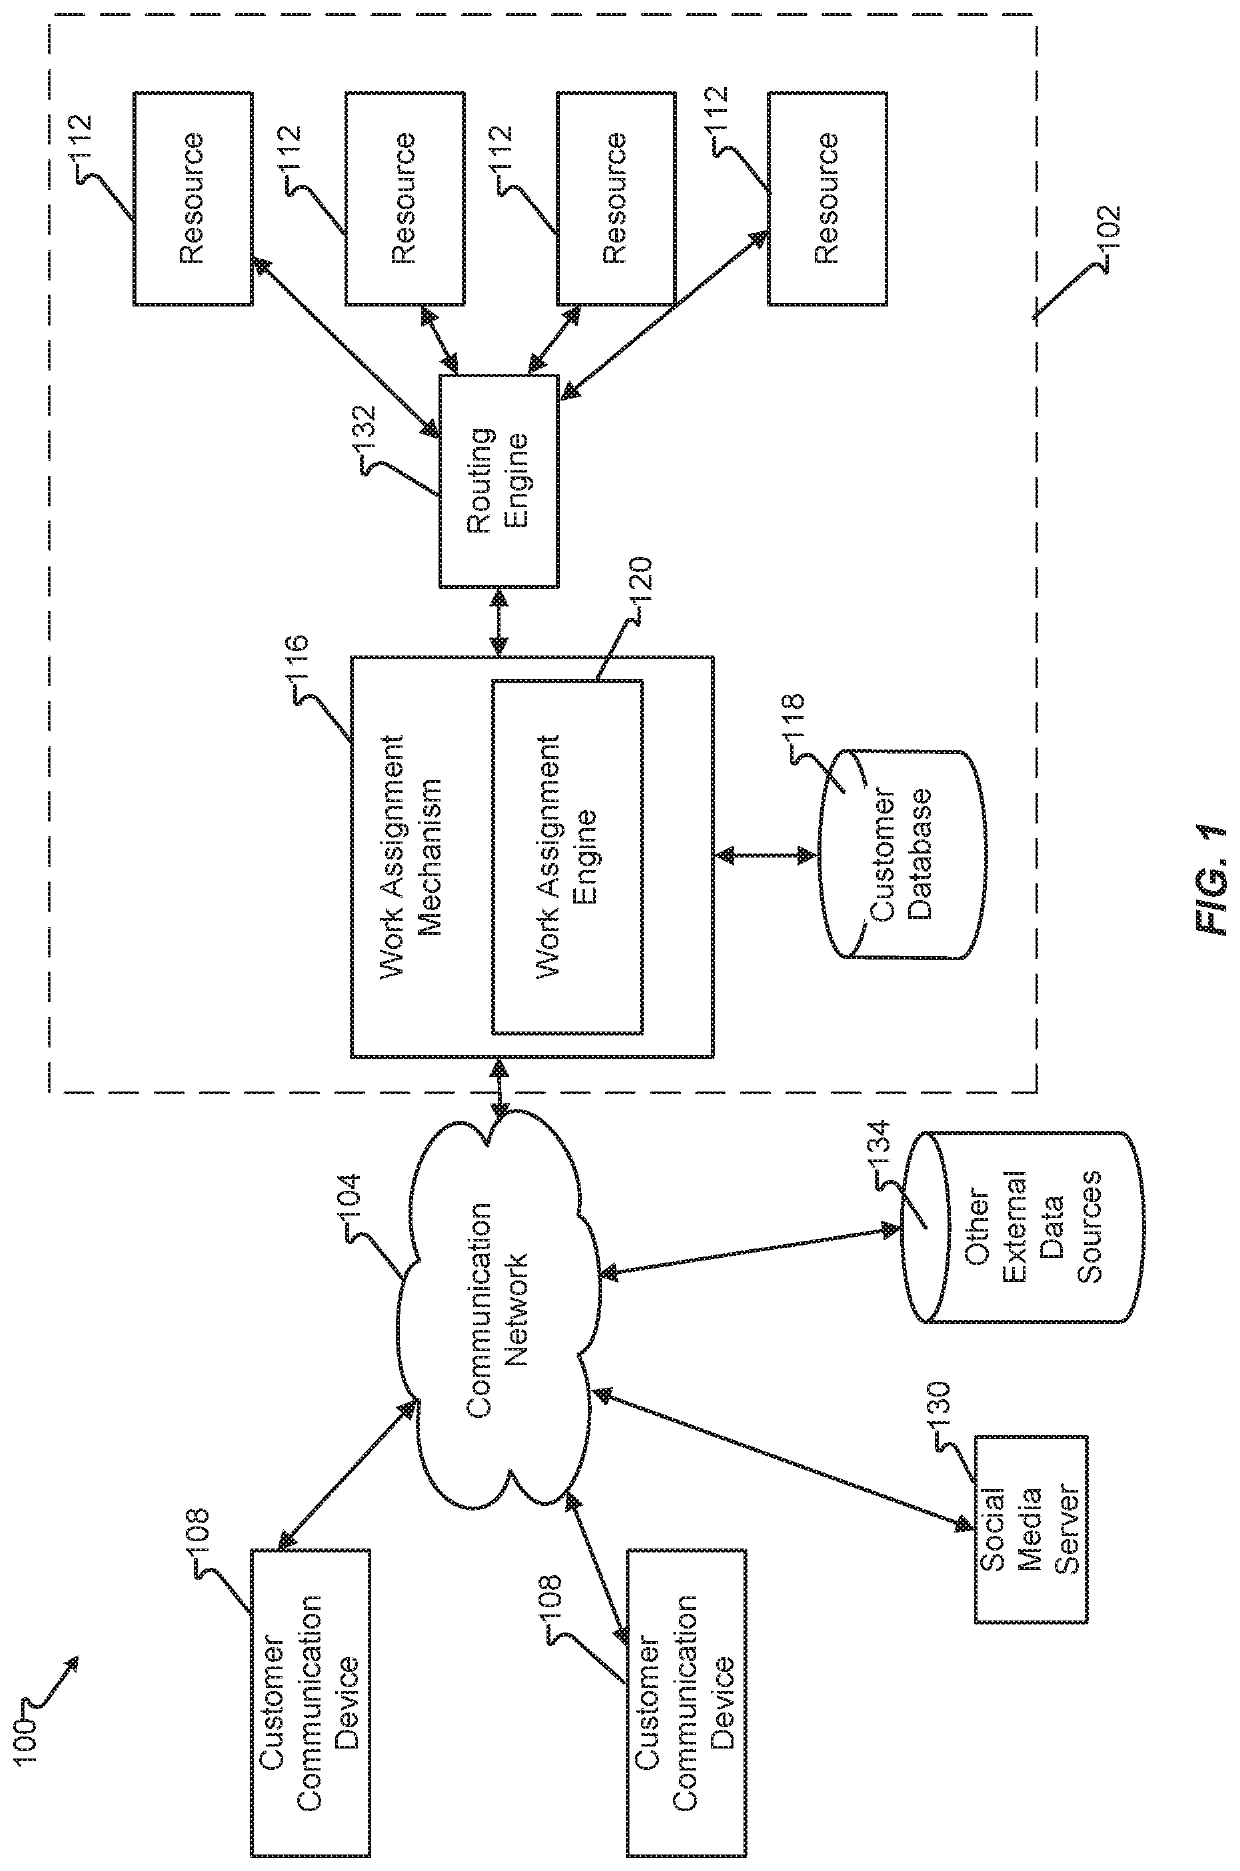 System and method for adaptive agent scripting